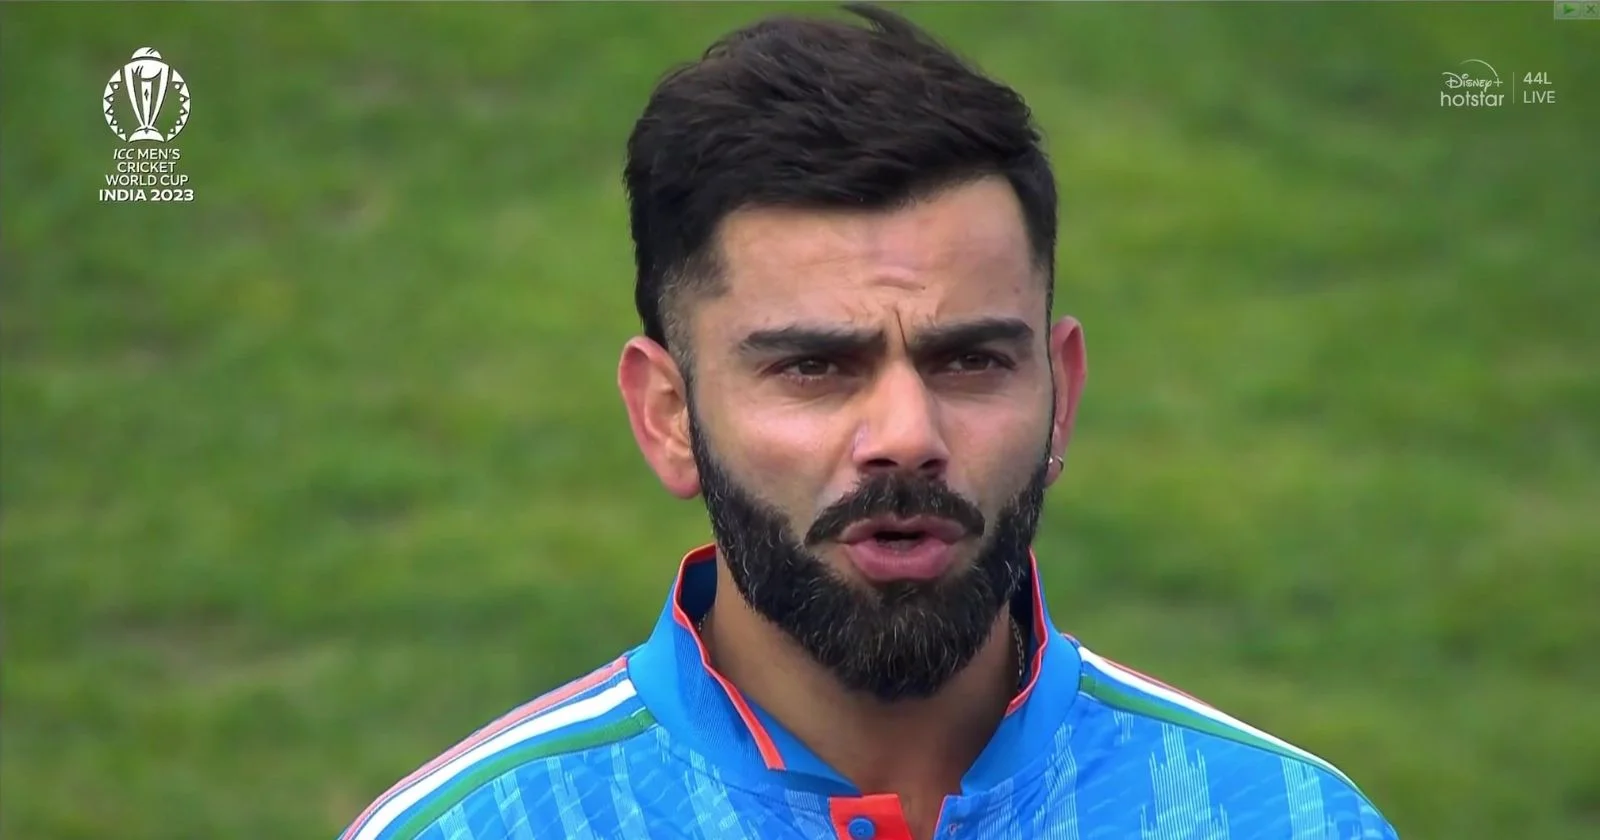 See Virat Kohli's new bomb hairstyle to welcome in 2020! - Sports India Show